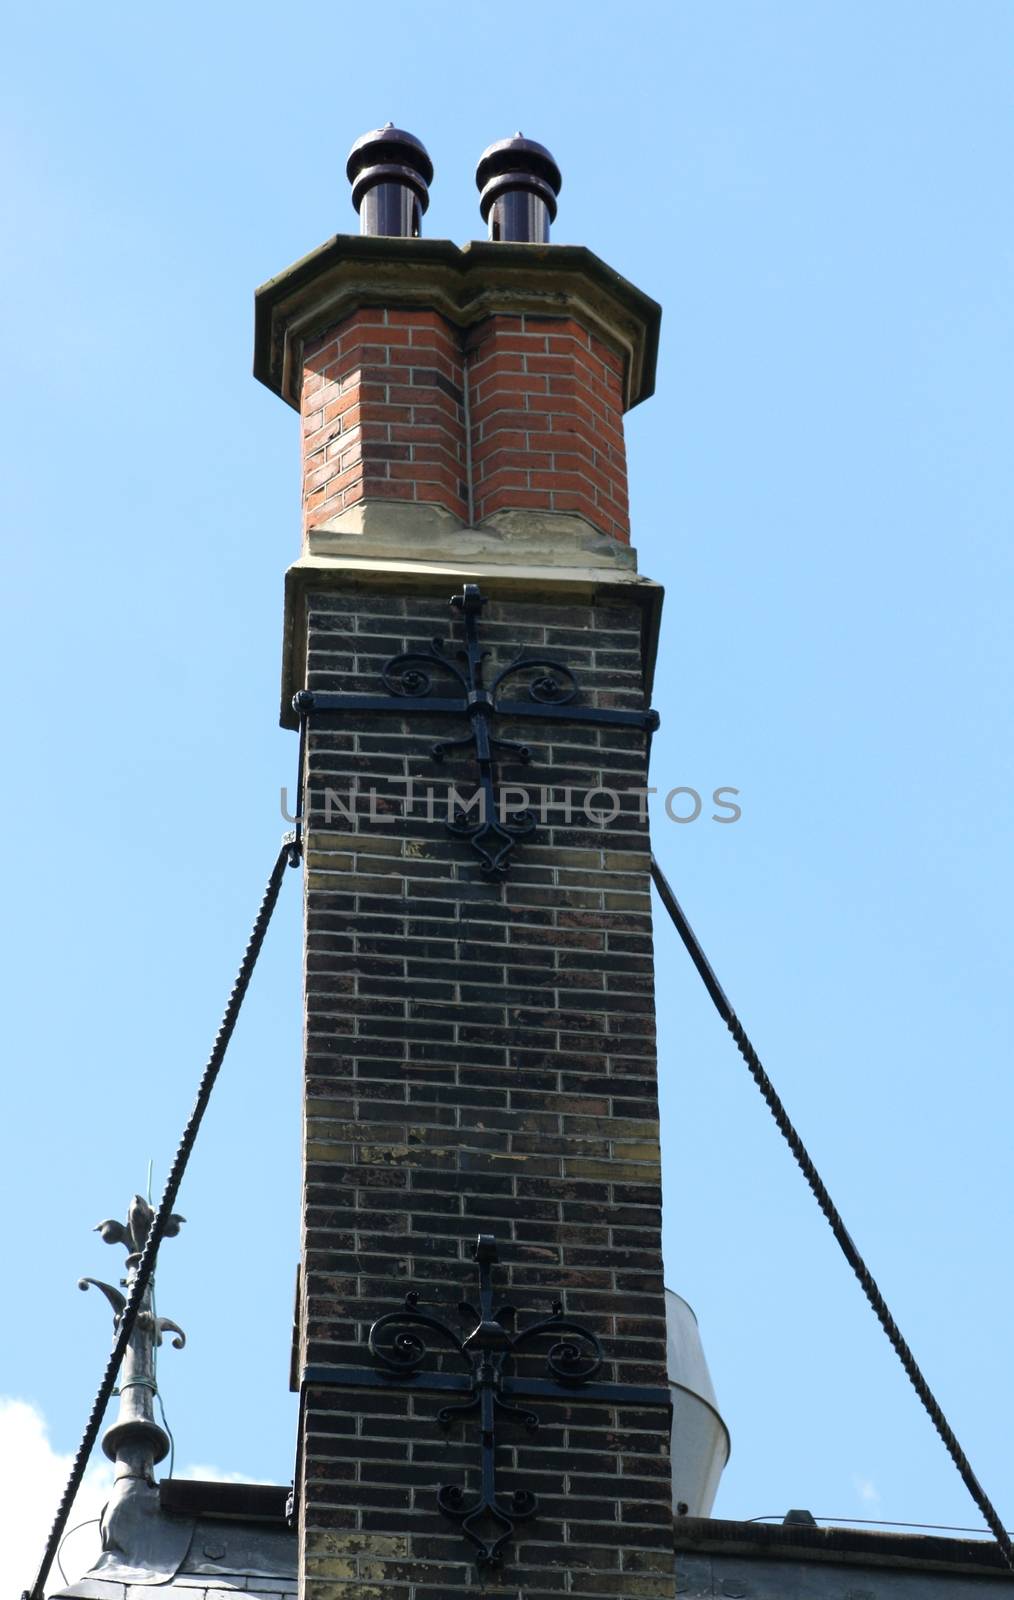 A tall chimney with struts